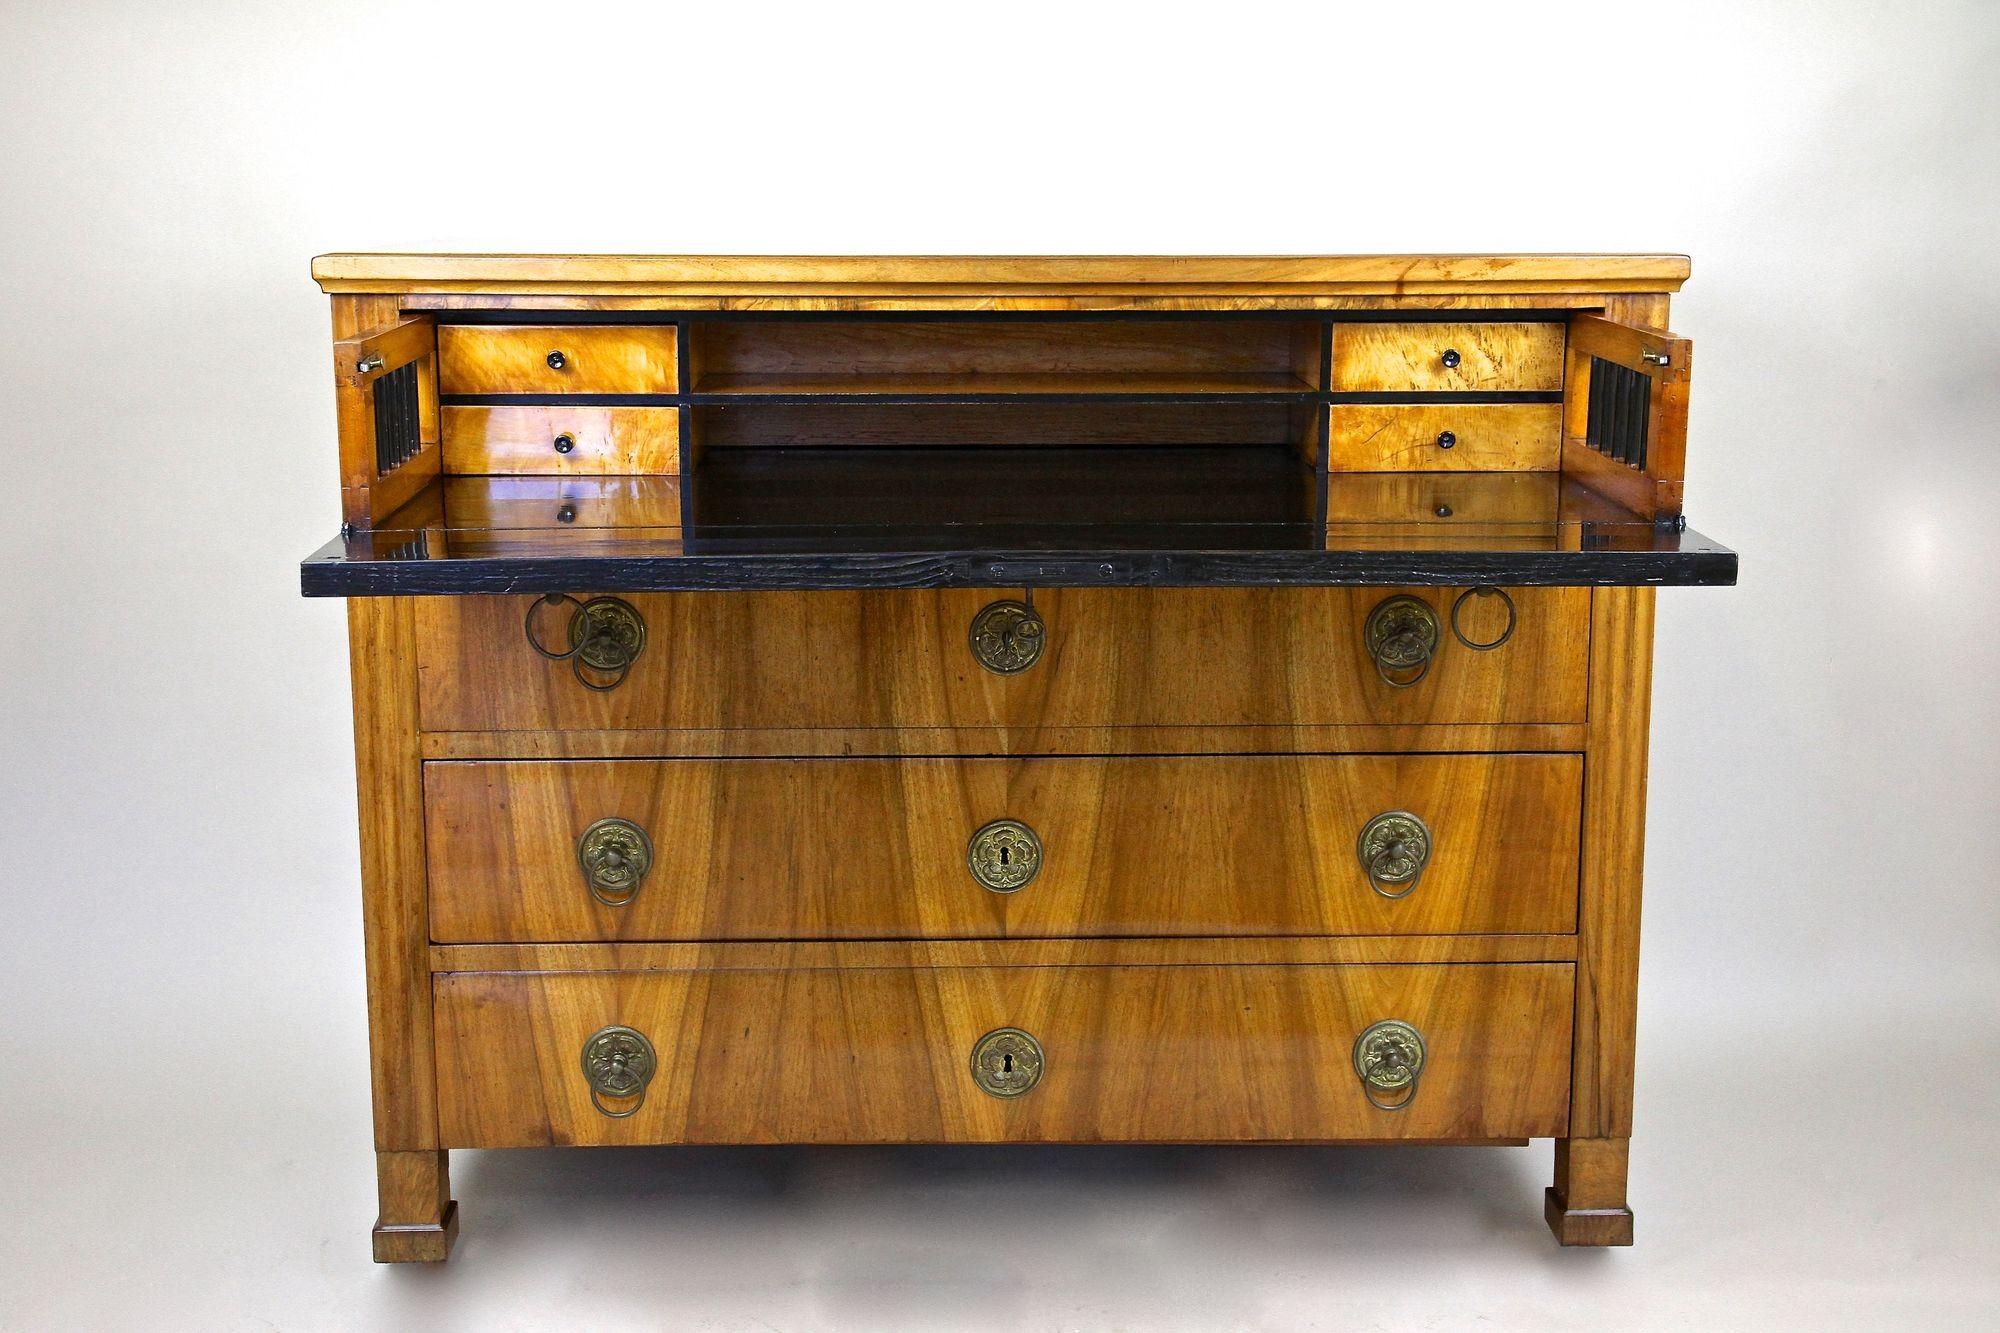 Fantastic nutwood chest of drawers/ writing commode from the renowed Biedermeier period in Austria. Veneered in fine light nutwood showing an outstanding grain, this perfect restored chest from around 1830 provides four large drawers. The hinged top